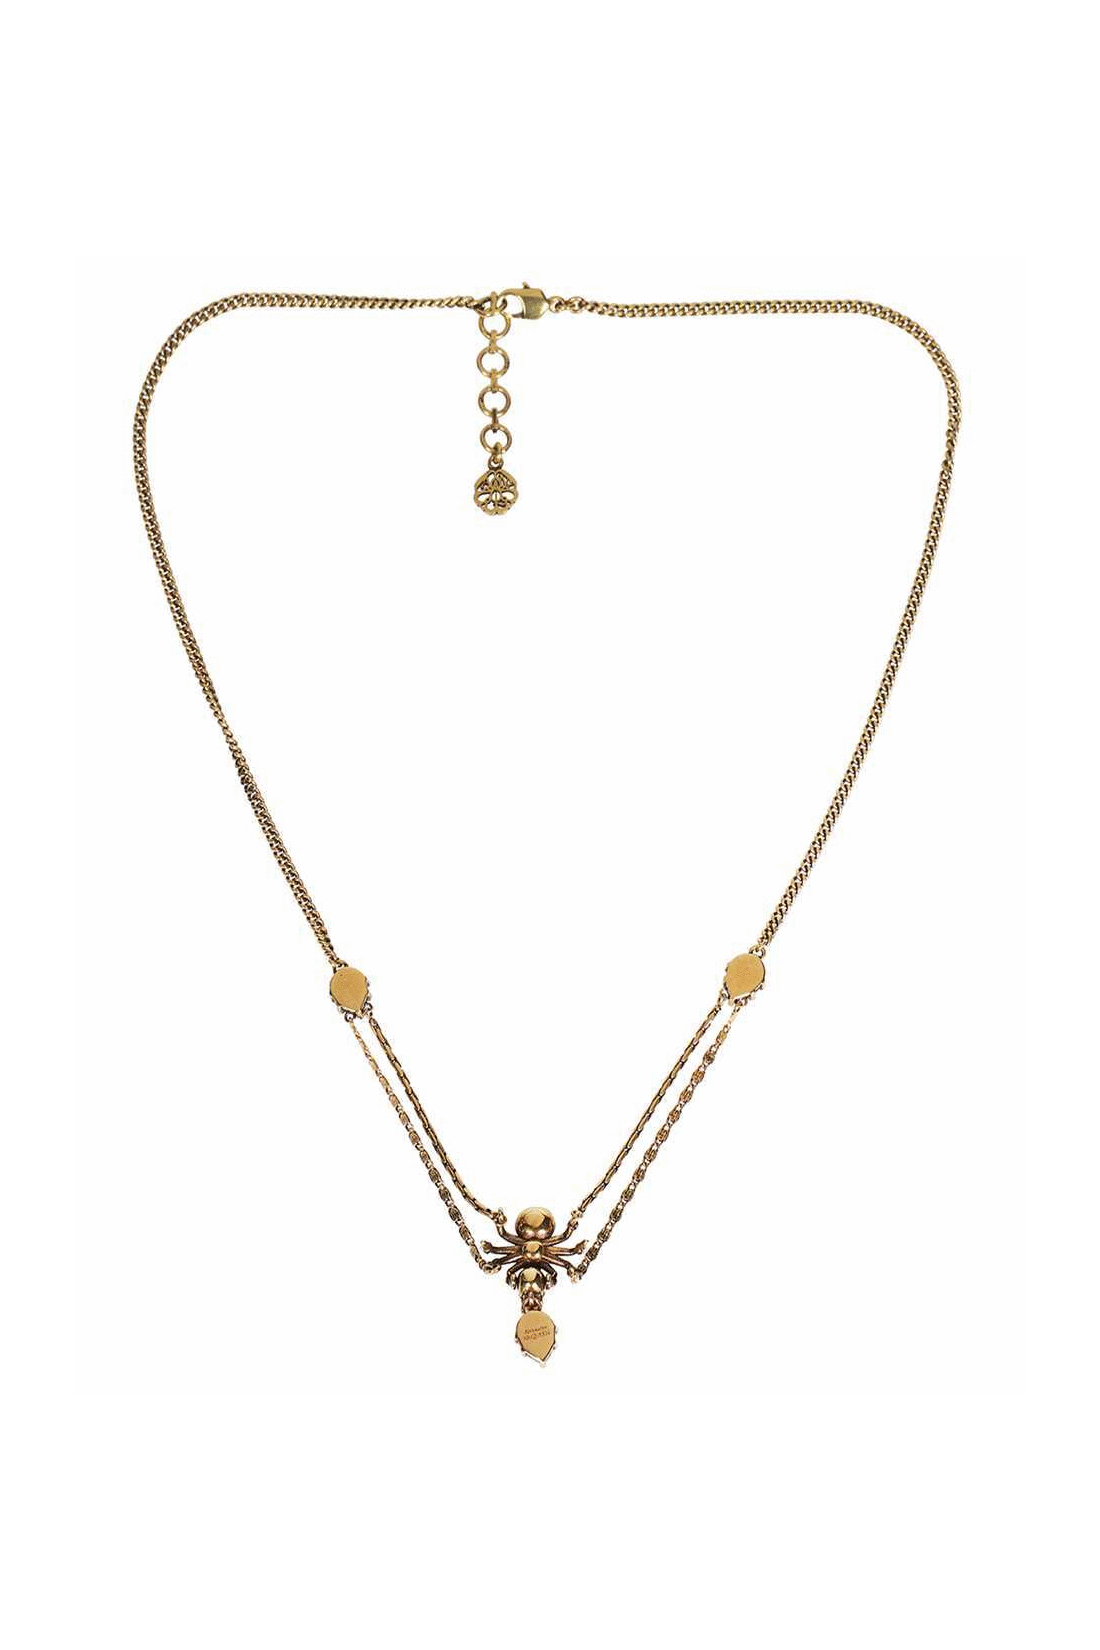 Chain necklace with Skull detail